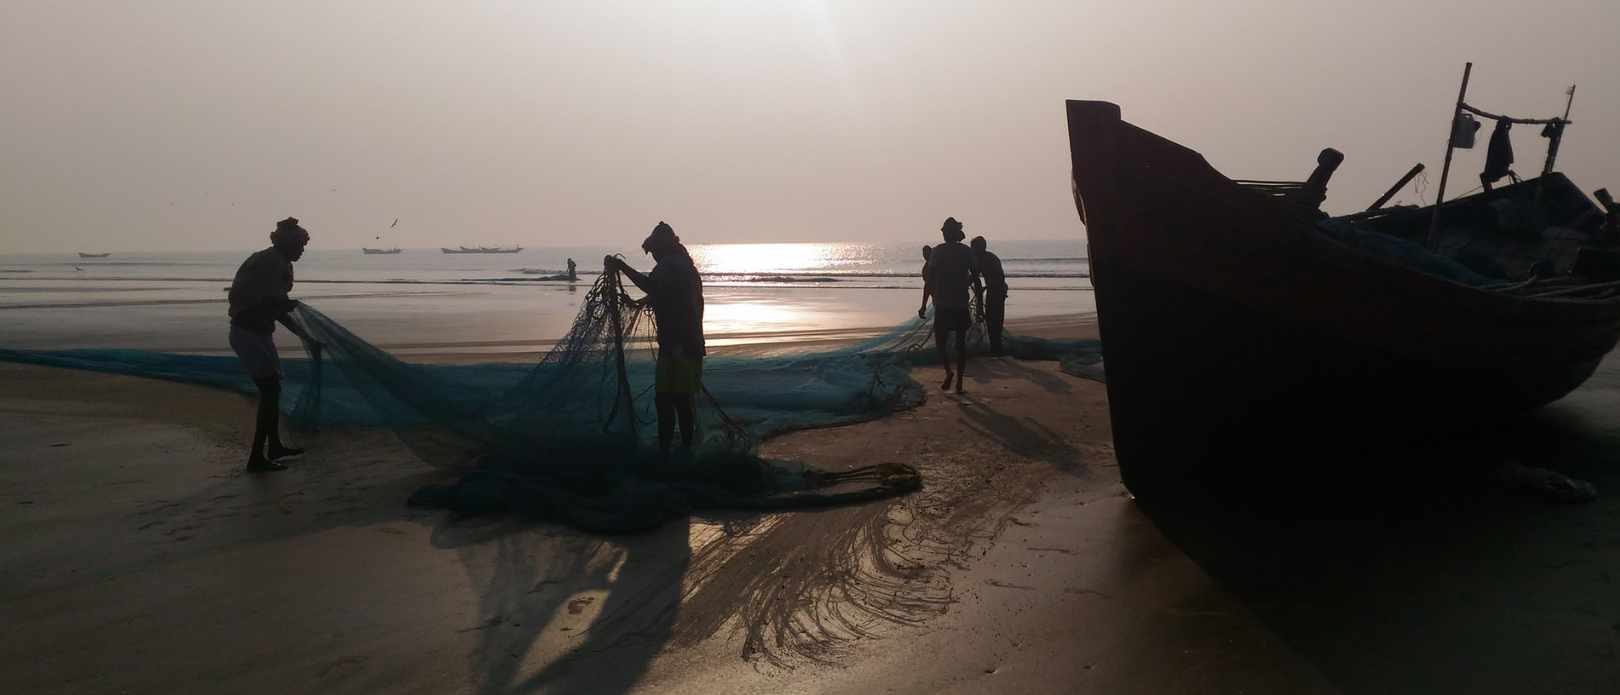 Silhouette image of people by the beach with fishing net and boat